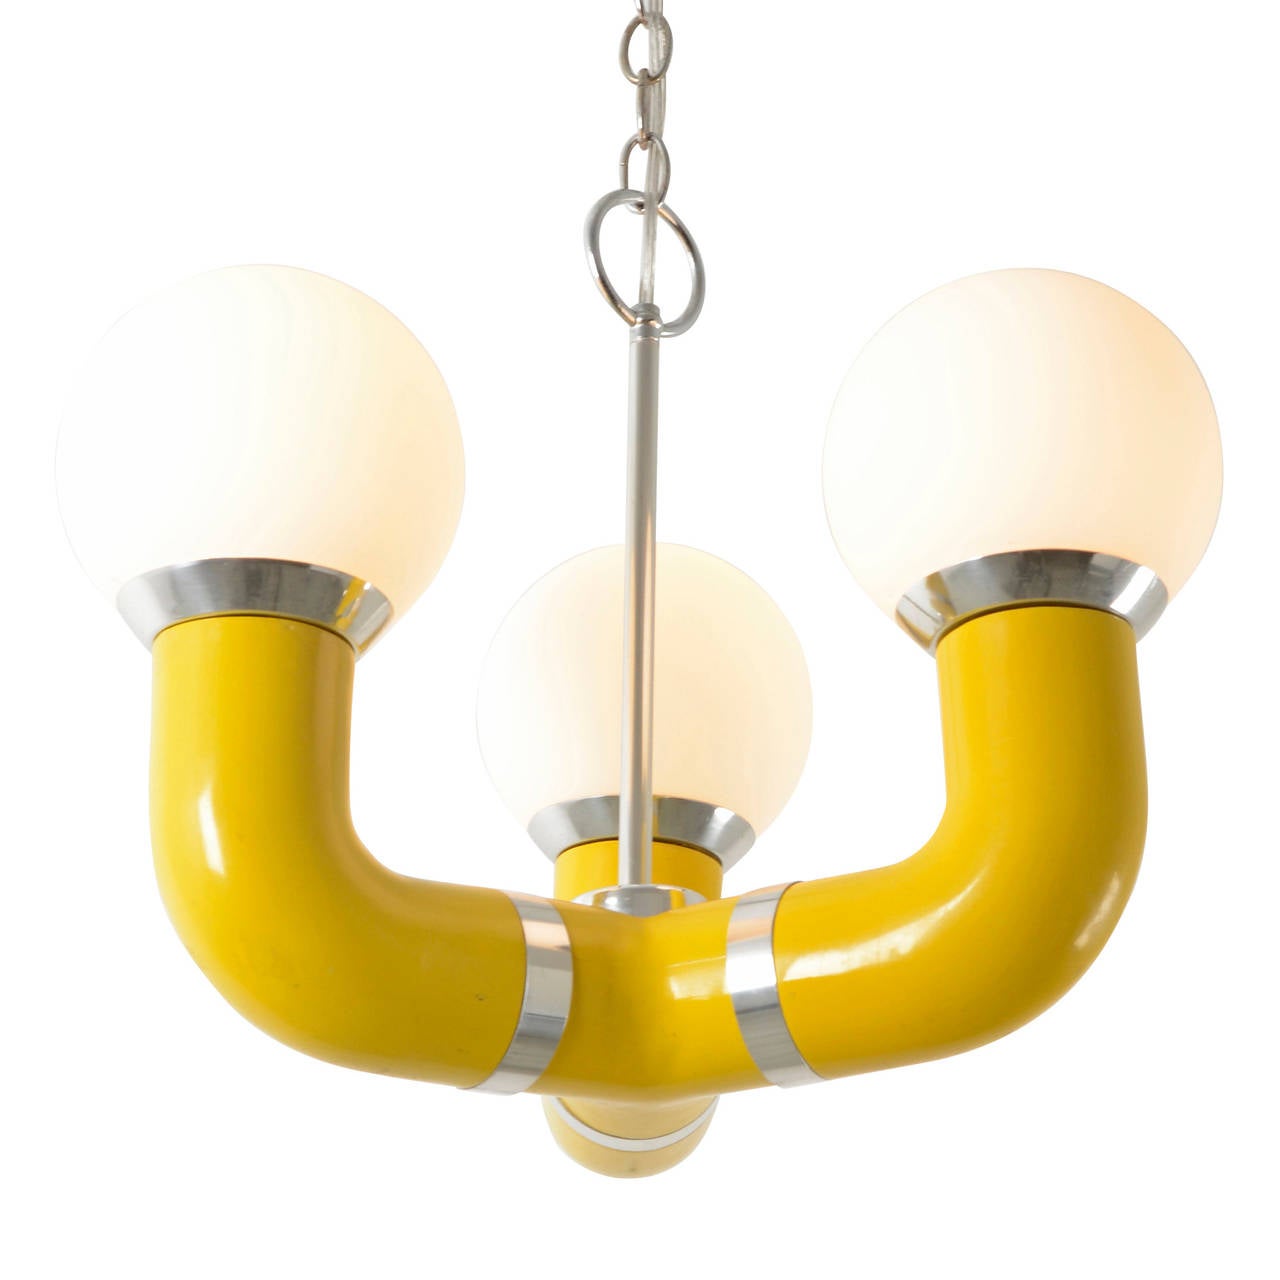 With all of the trappings of the late Mid-Century Mod revolution, this yellow and chrome three-arm chandelier brings unexpected shapes and finishes together to form the kind of light that could belong on Stanley Kubrick's Discovery One space Craft.